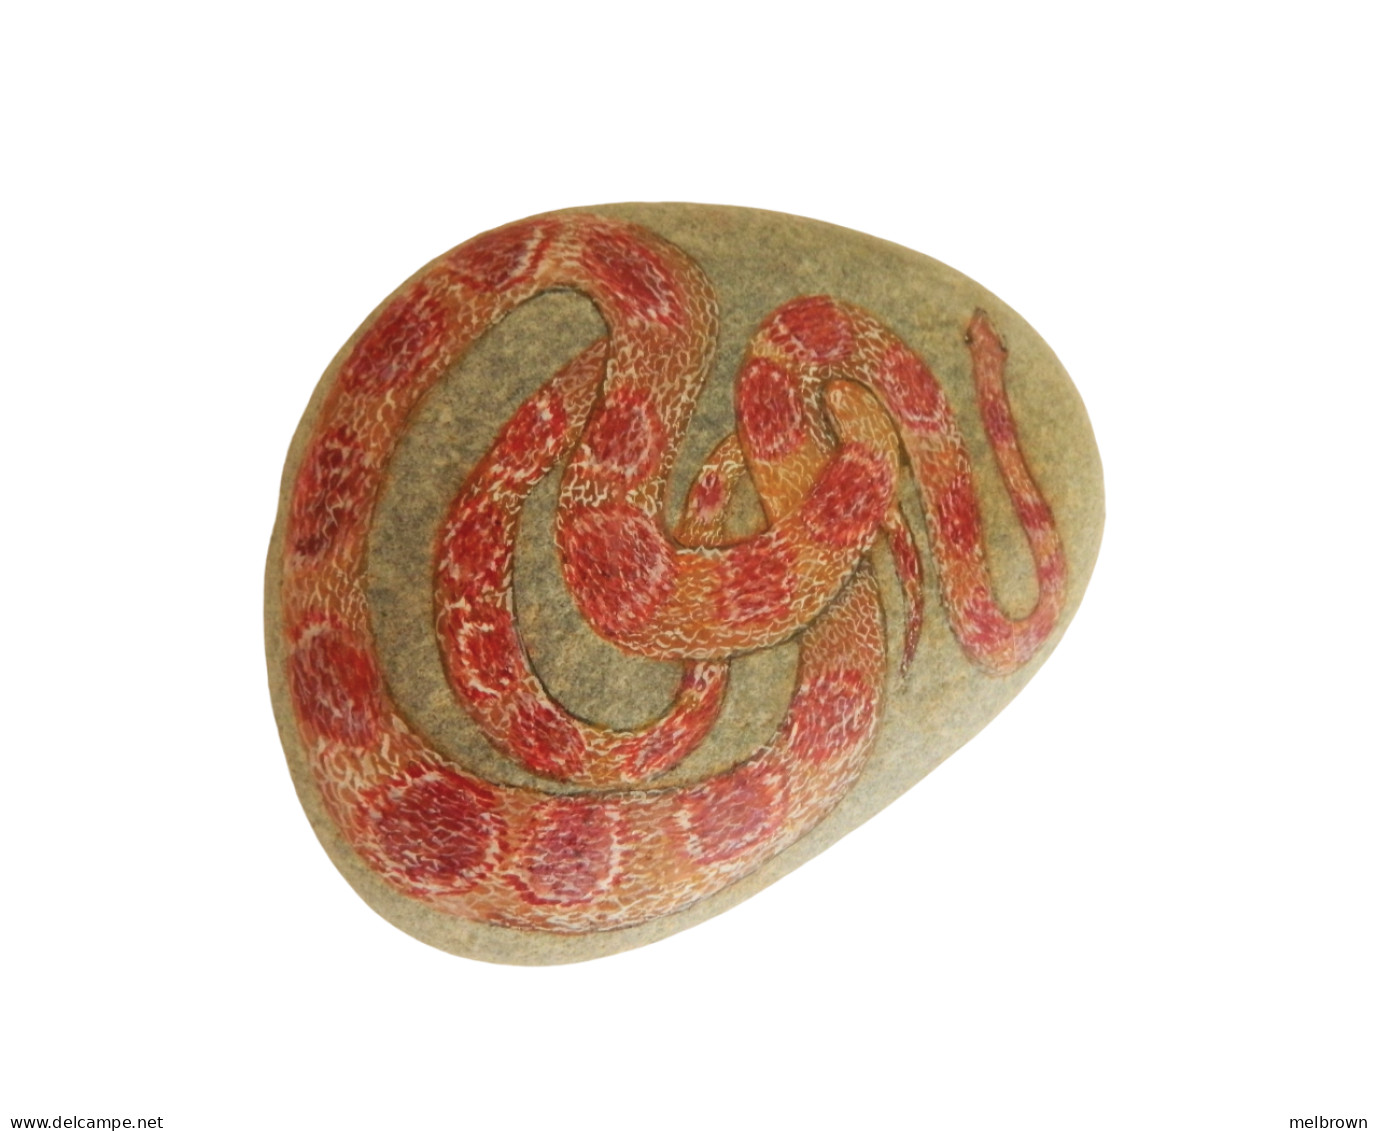 CORN SNAKE Hand Painted On A Beach Stone Paperweight Decoration - Presse-papiers